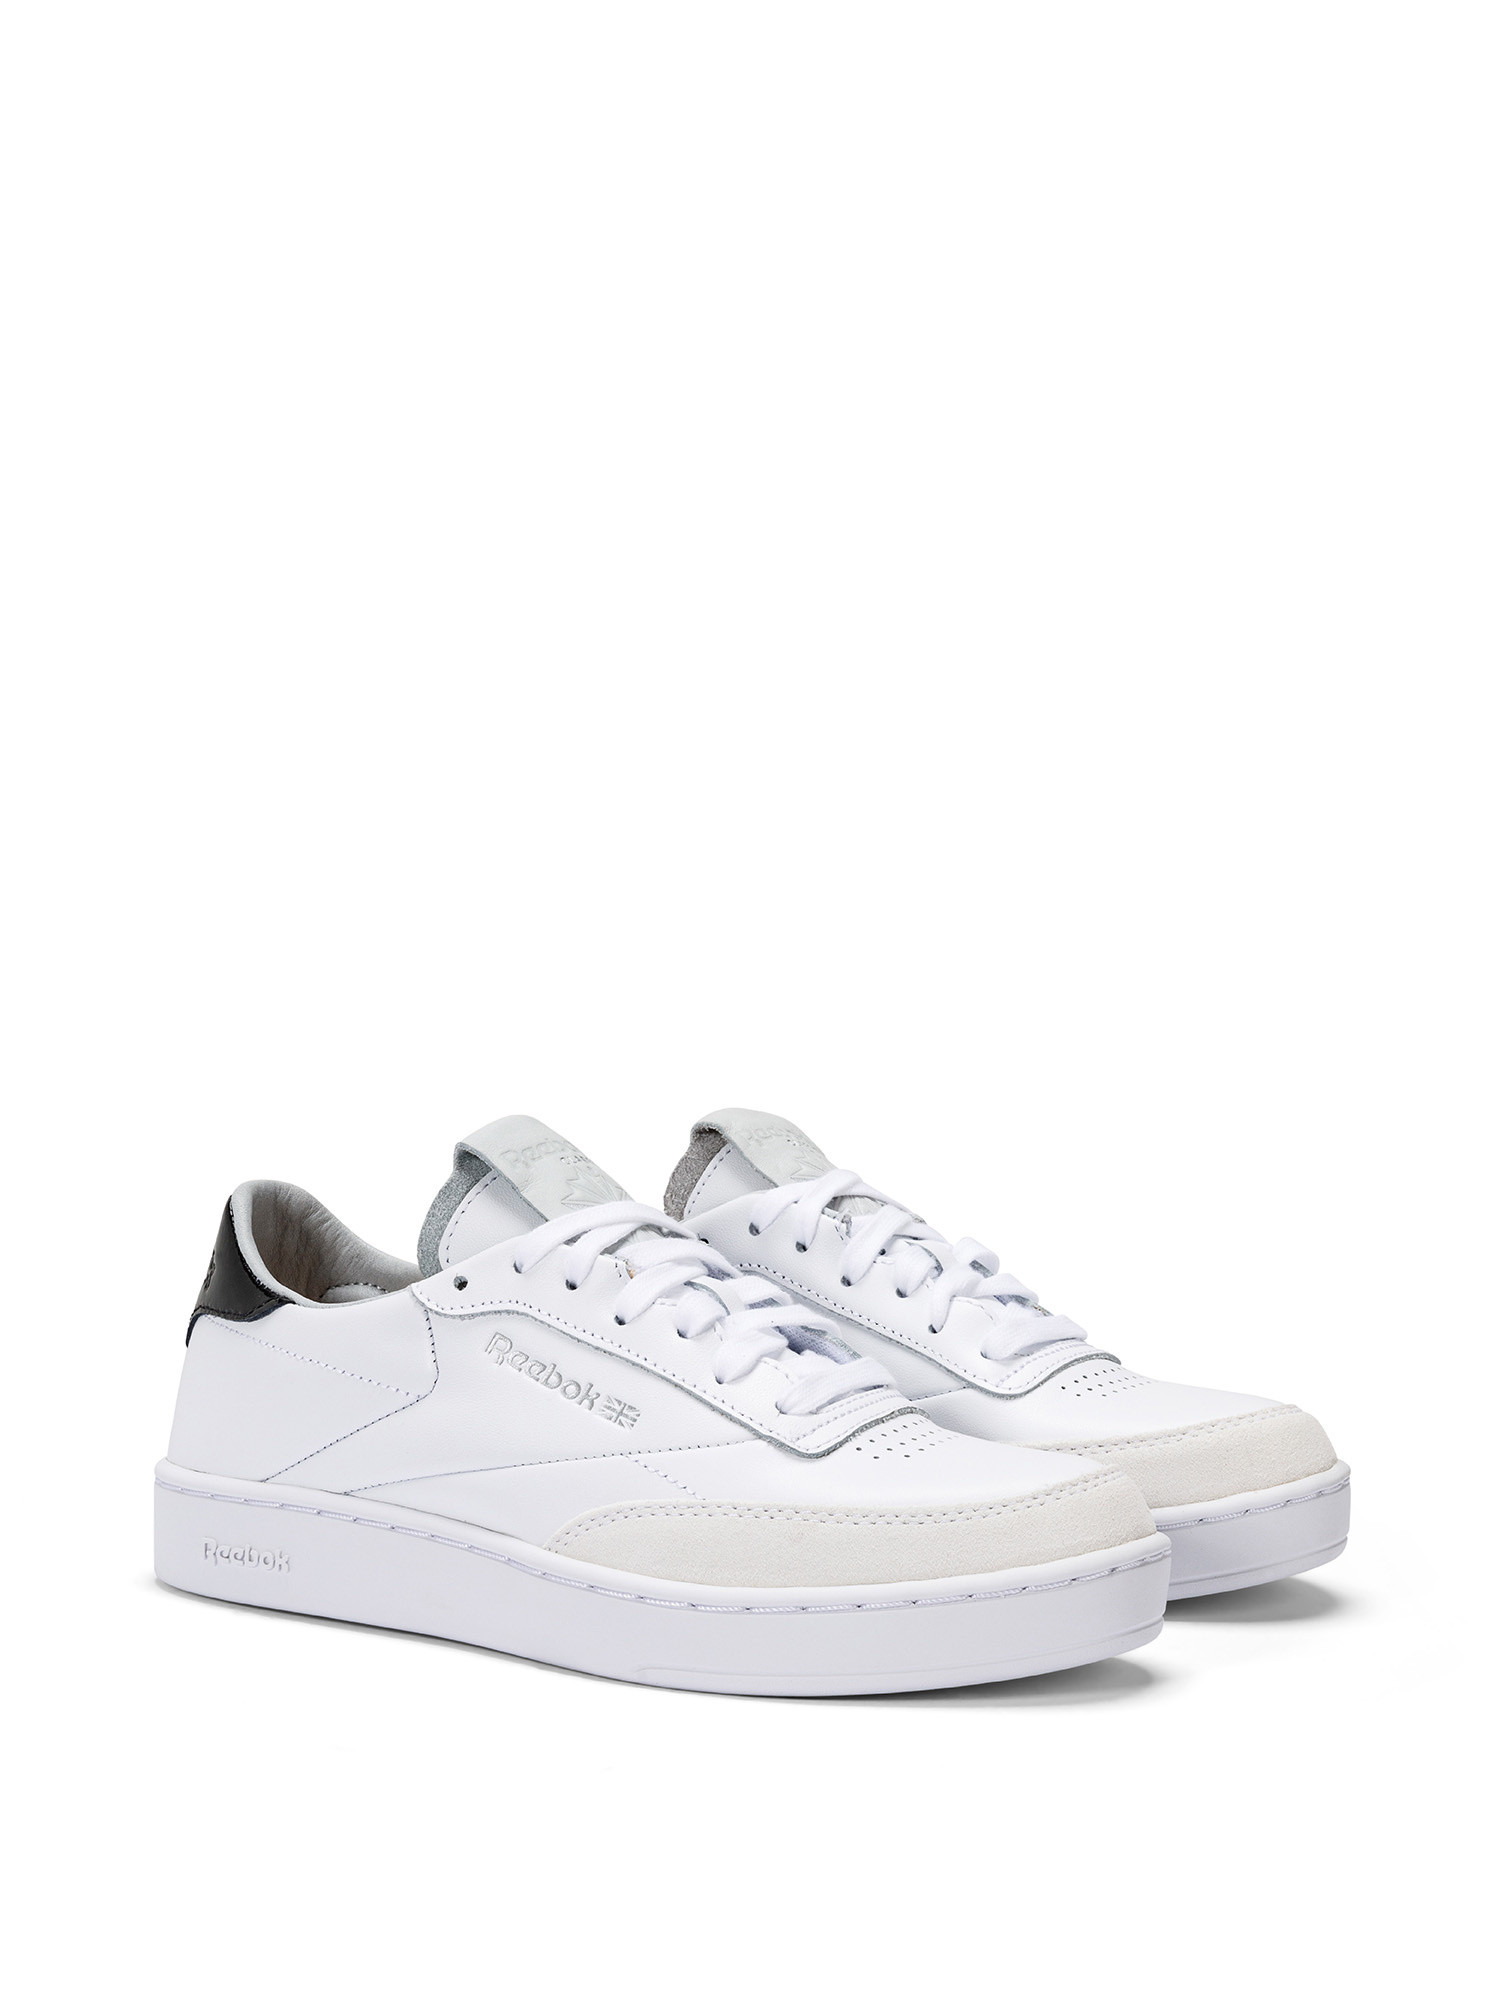 Reebok - Club C Clean Shoes, White, large image number 1